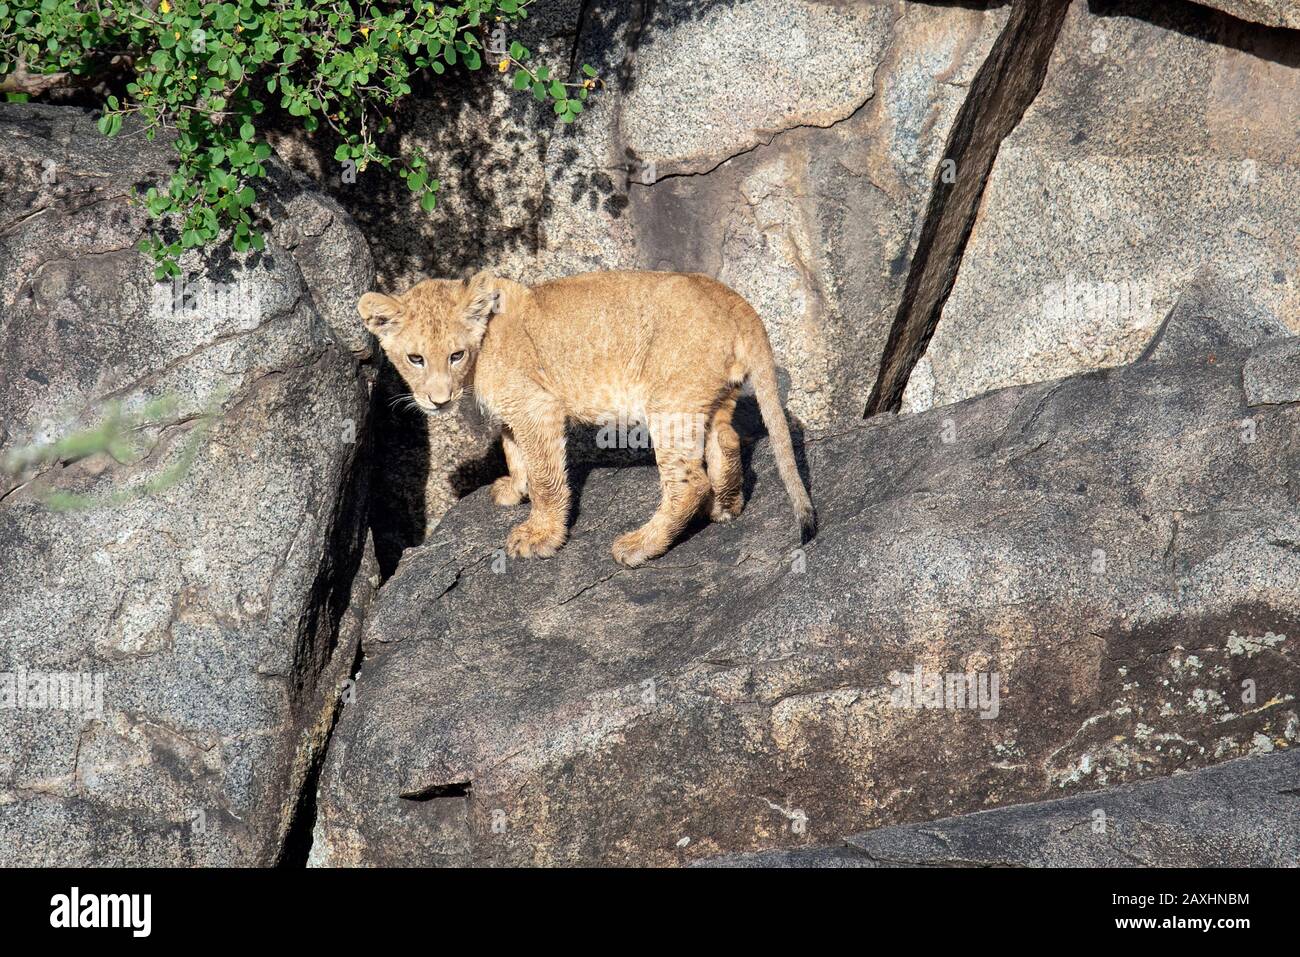 Lion cub looking down from his perch on the rocks. Stock Photo